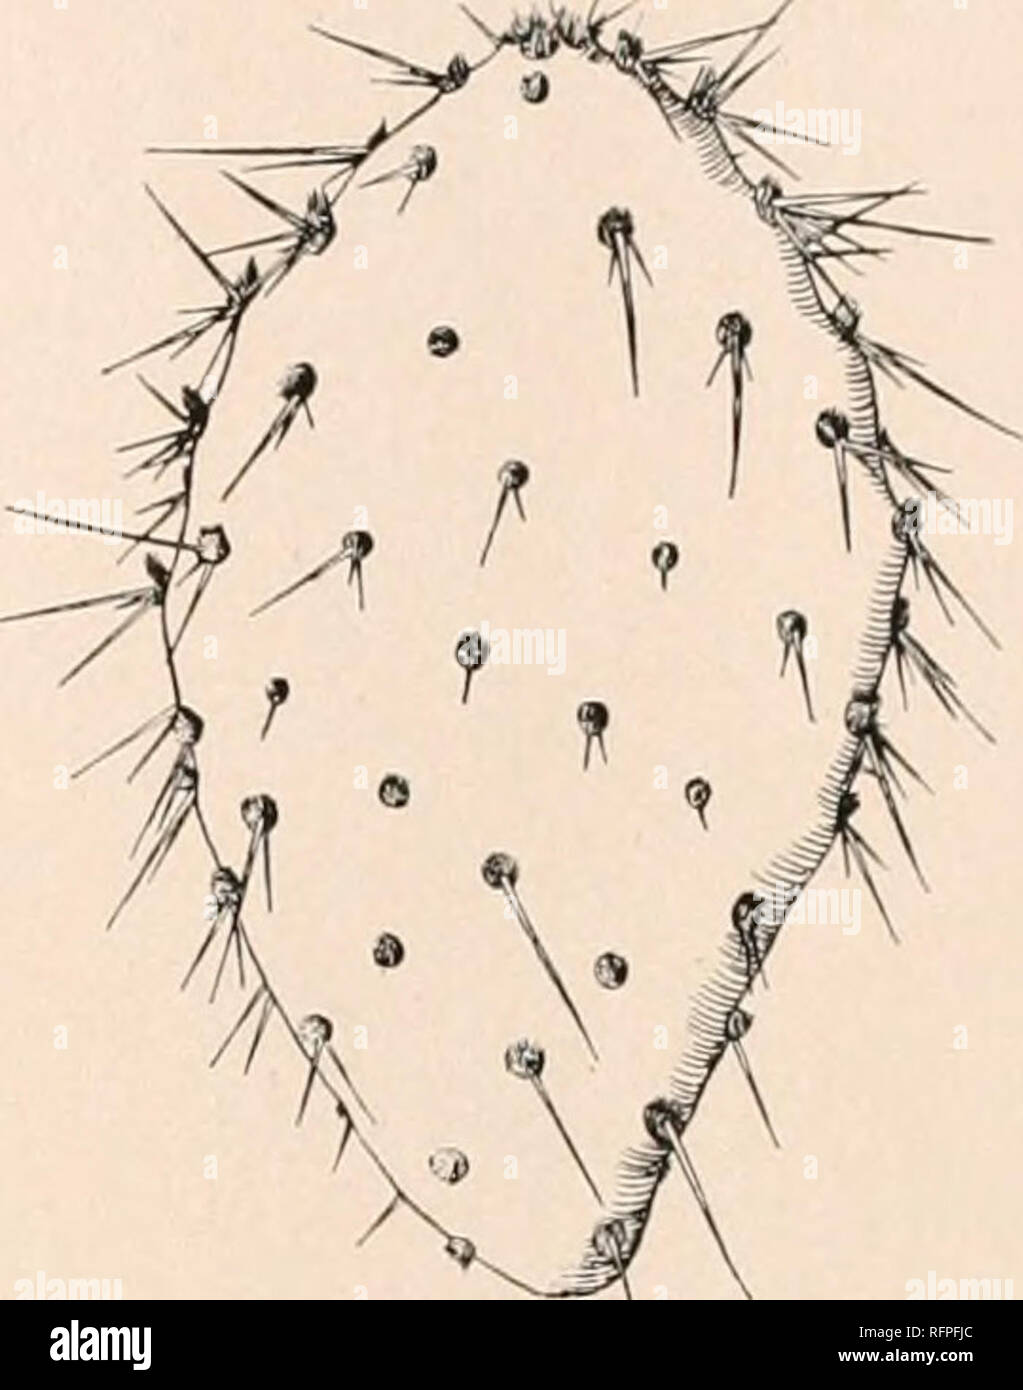 . Carnegie Institution of Washington publication. OPUNTIA. 145 back from the Southwest by W. H. Emory. They can never be critically identified, but are probably of this relationship. Illustrations: Engler and Prantl, Pflanzenfam. 36a: f. 57, C; Forster, Handb. Cact. ed. 2. f. 141; Illustr. Fl. 2: f. 2530; ed. 2. 2: f. 2989; Pac. R. Rep. 4: pi. 9, f. i to 5; pi. 22, f. 12 to 15; Wiener Illustr. Gartenz. 10: f. 115, all as Opuntia caiihiucliica; N. Mex. Agr. Exp. Sta. Bull. 78: pi. [7], as Opuntia chihuahuensis; Contr. U. S. Nat. Herb. 12: pi. 55, as Opuntia blakeana; Cact. Mex. Bound, pi. 75, f Stock Photo